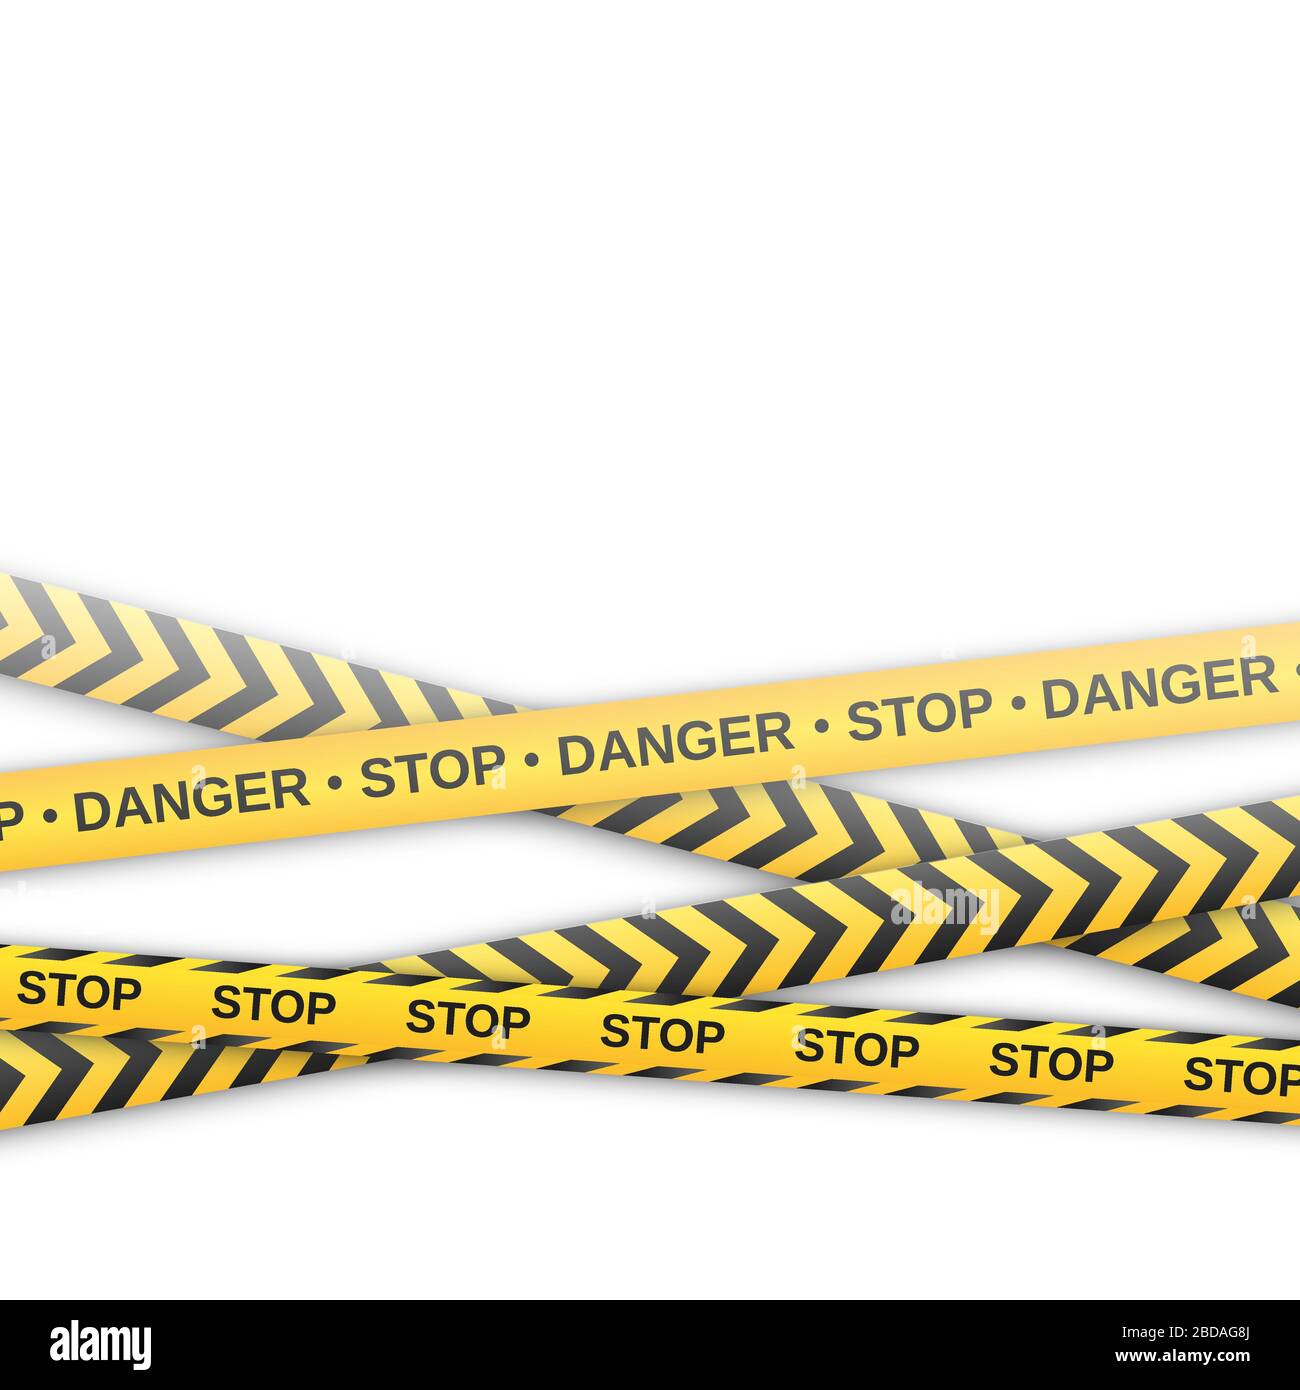 Warning yellow and black tapes on white background. Safety fencing ribbon. Vector illustration Stock Vector